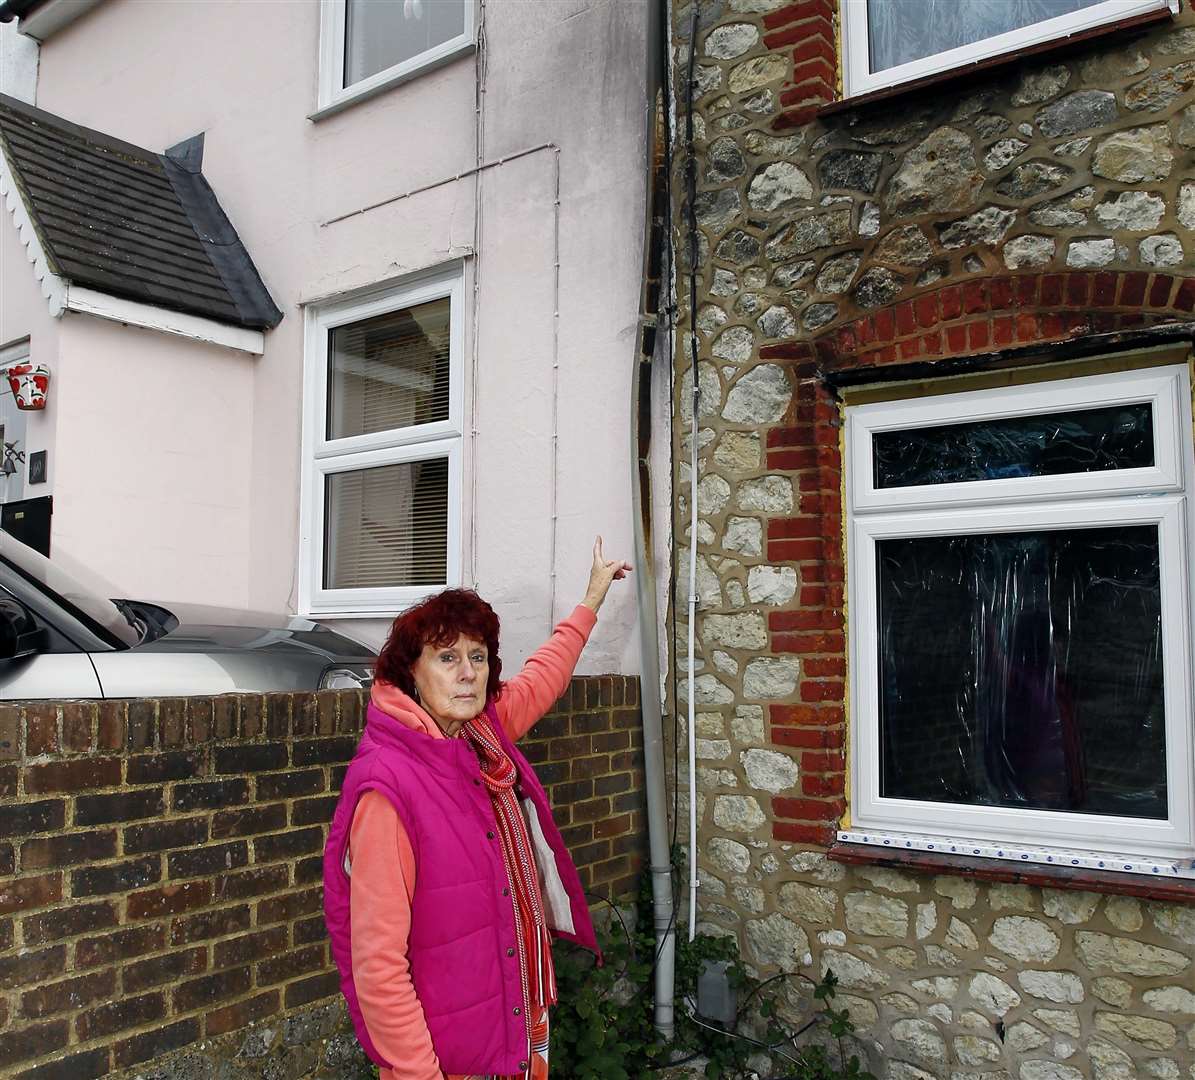 Shelley Morgan shows the visible smoke damage outside her home